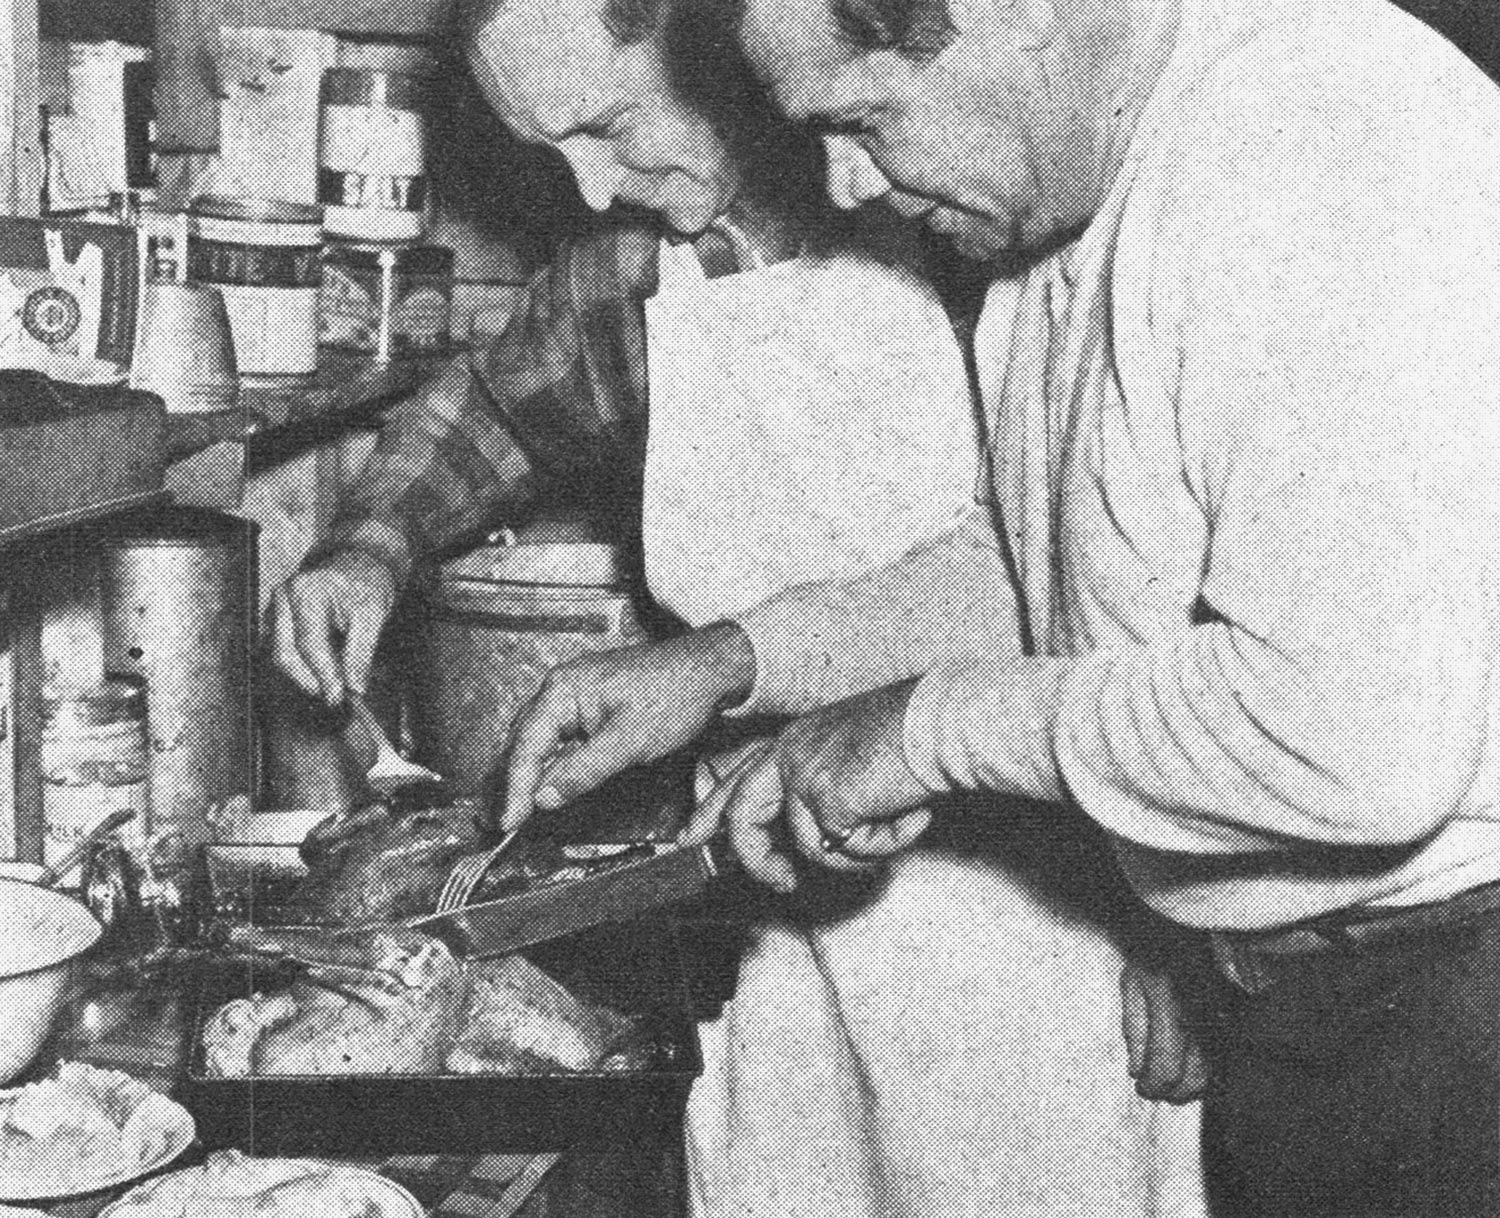 Babe Ruth carves up a cooked chicken.